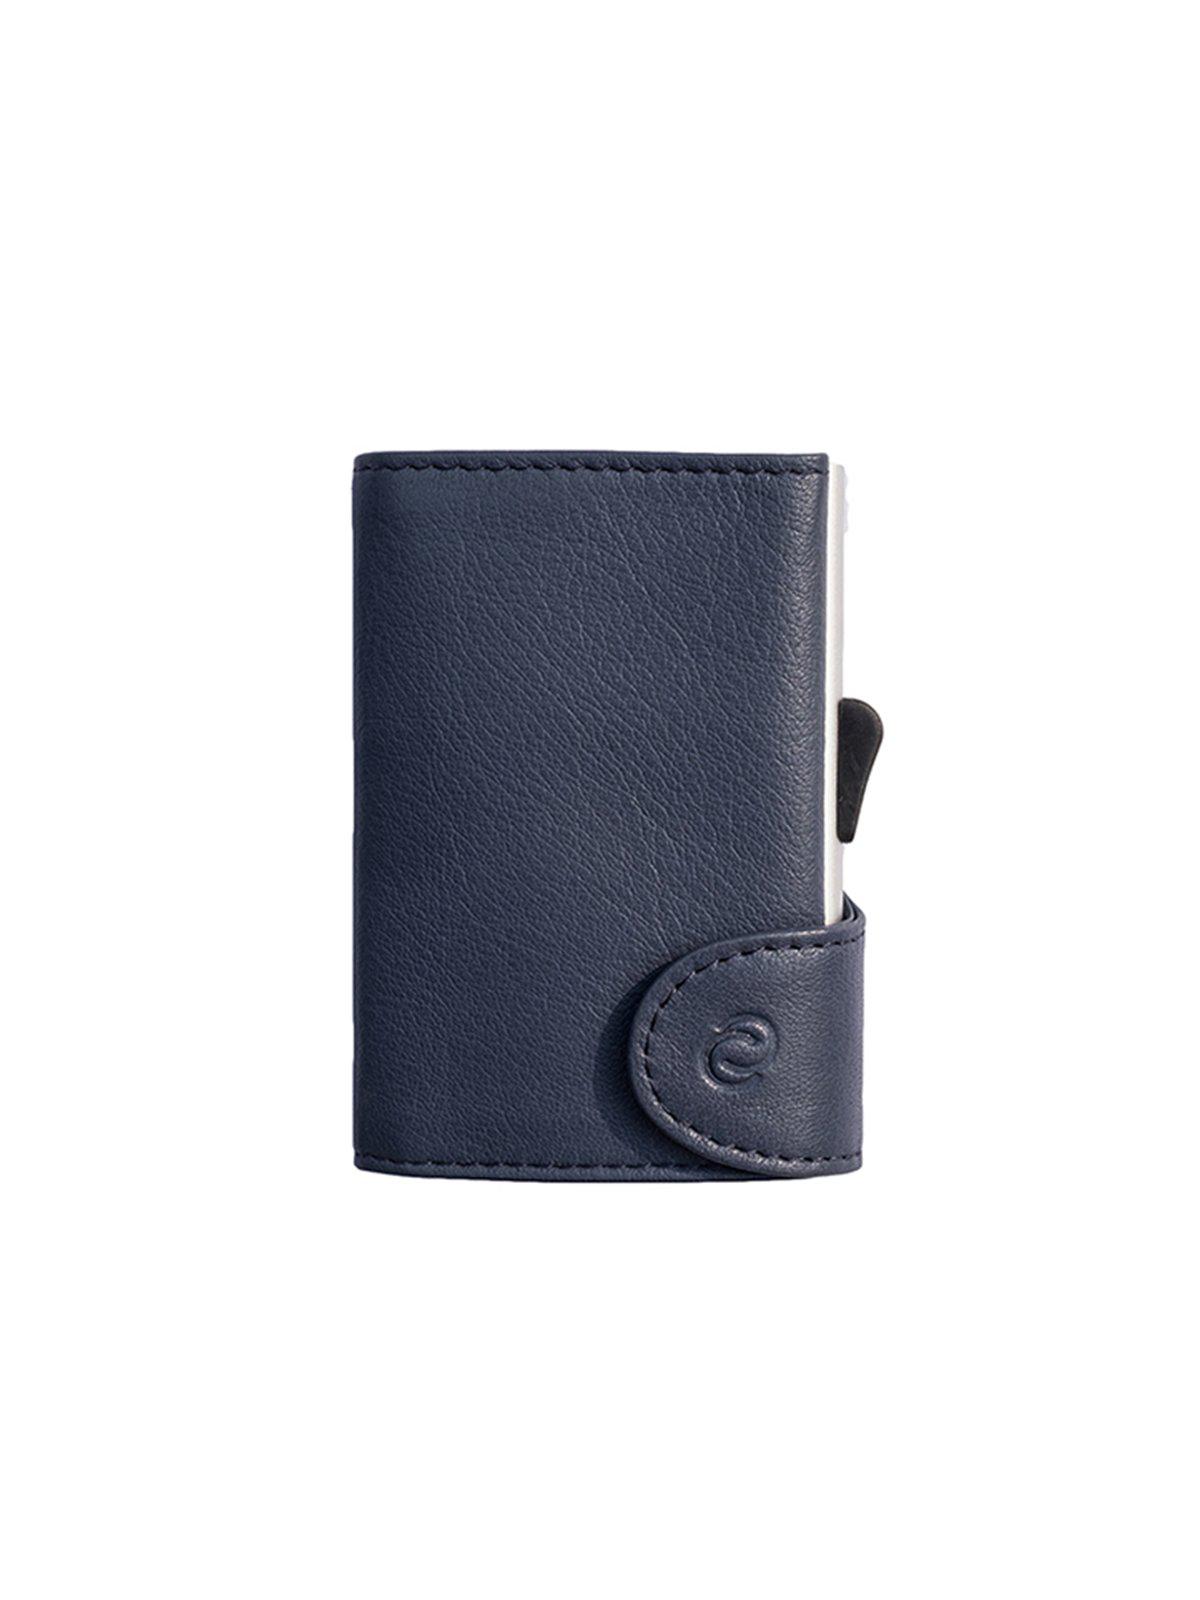 C-Secure Italian Leather RFID Wallet Blu Marino - MORE by Morello Indonesia